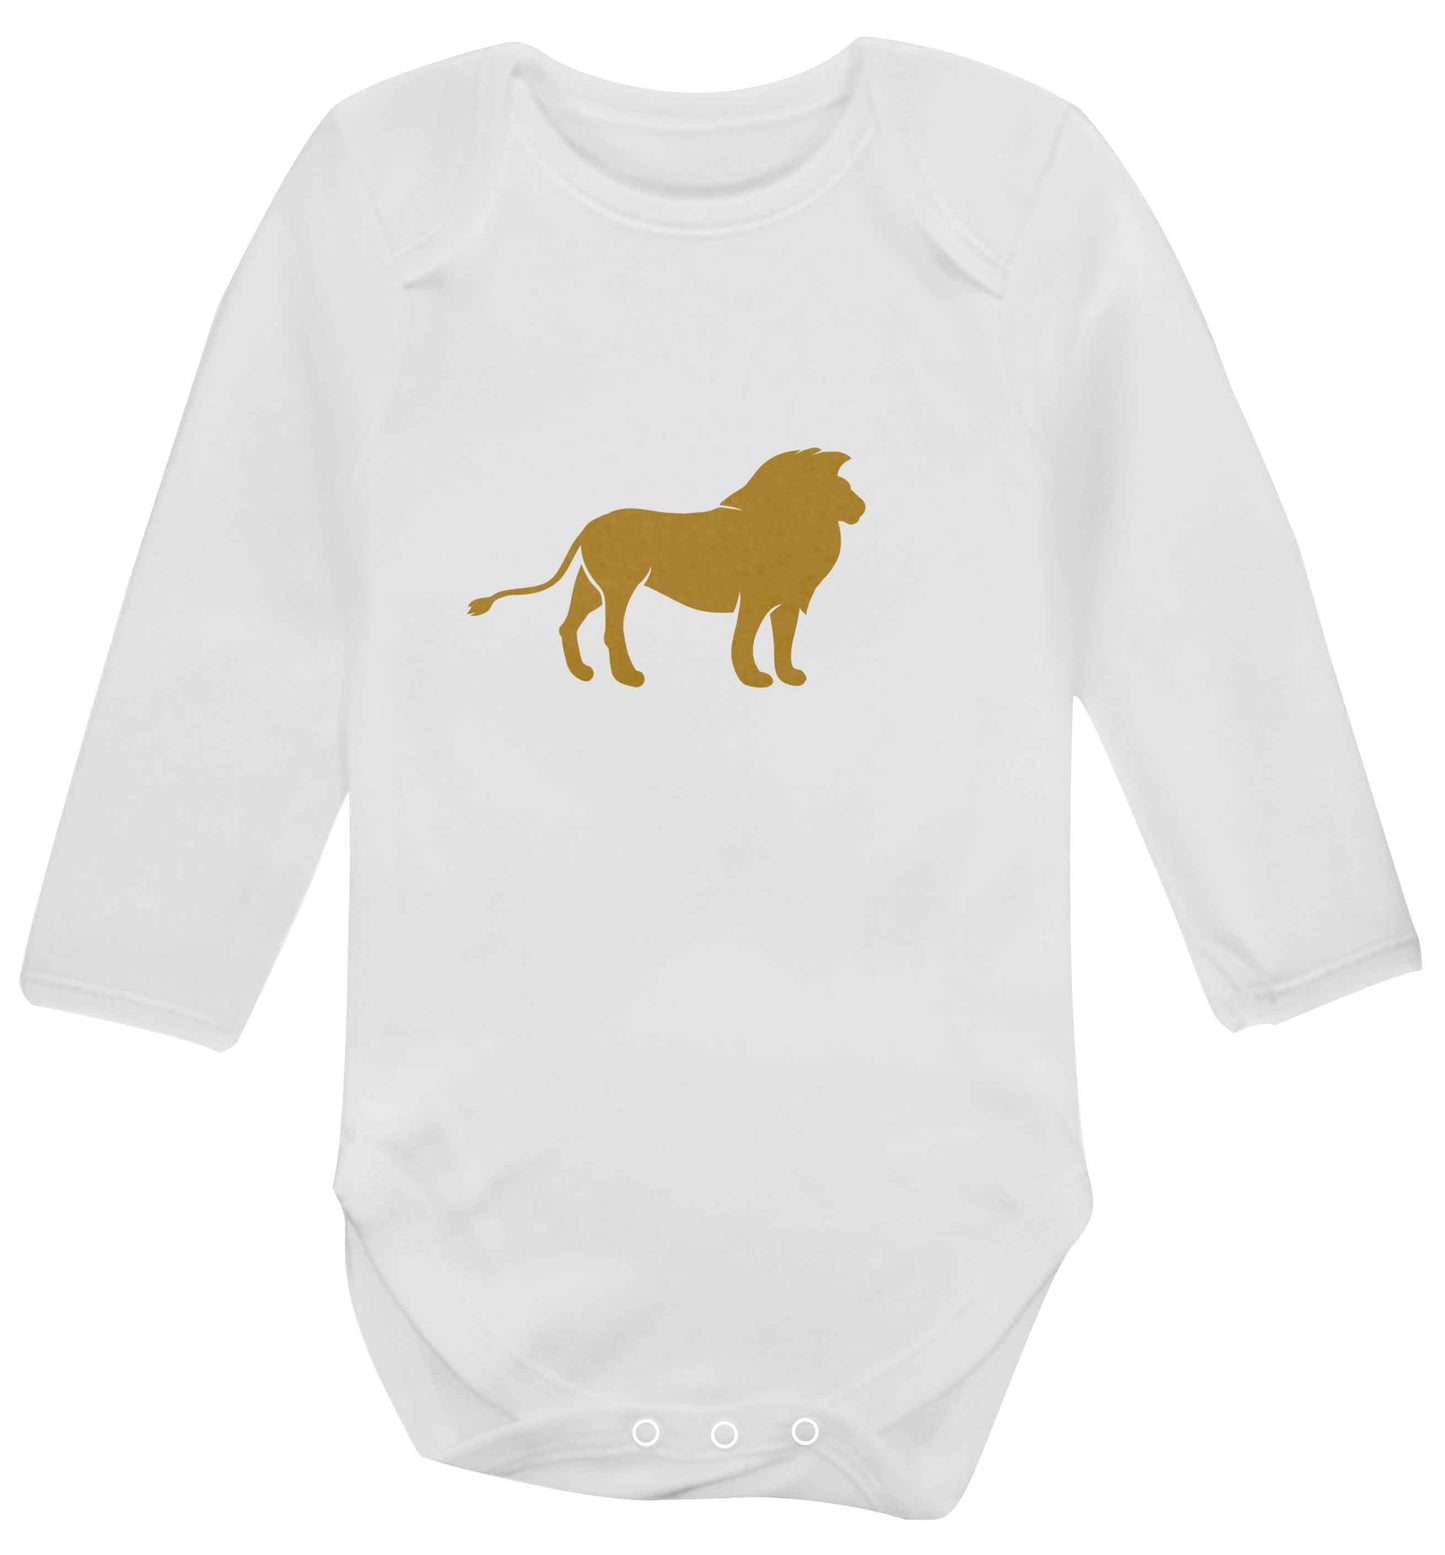 Gold lion baby vest long sleeved white 6-12 months